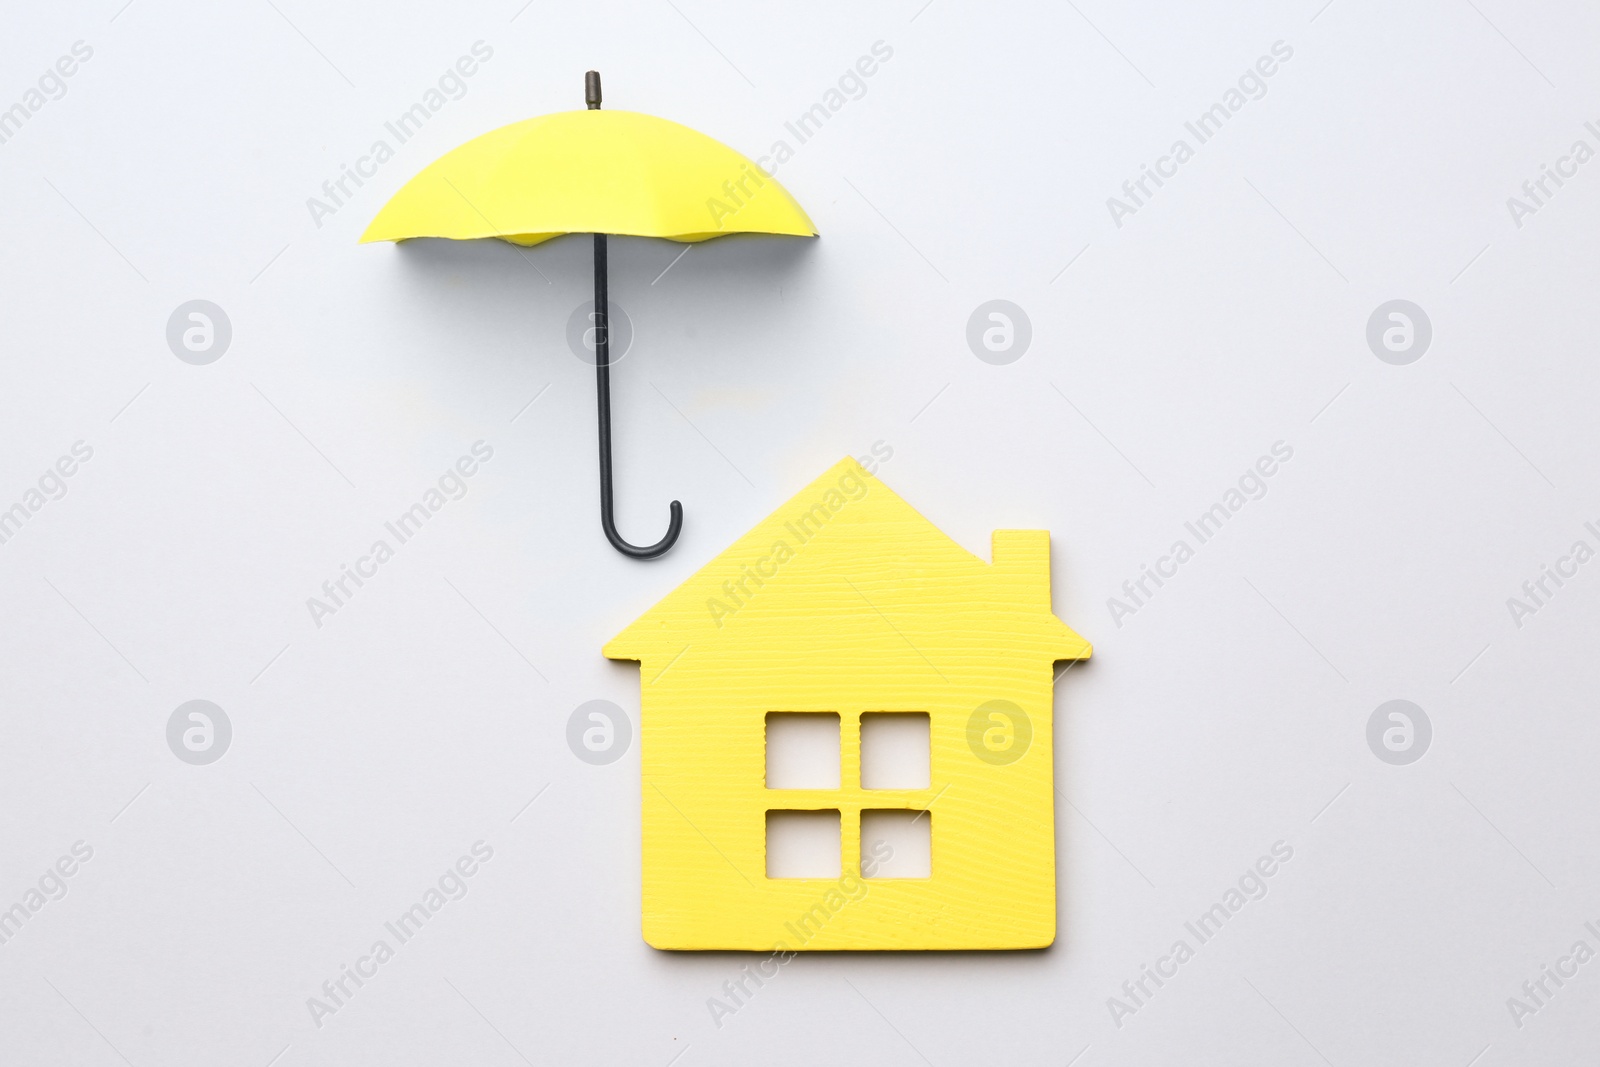 Photo of Mini umbrella and house model on white background, top view